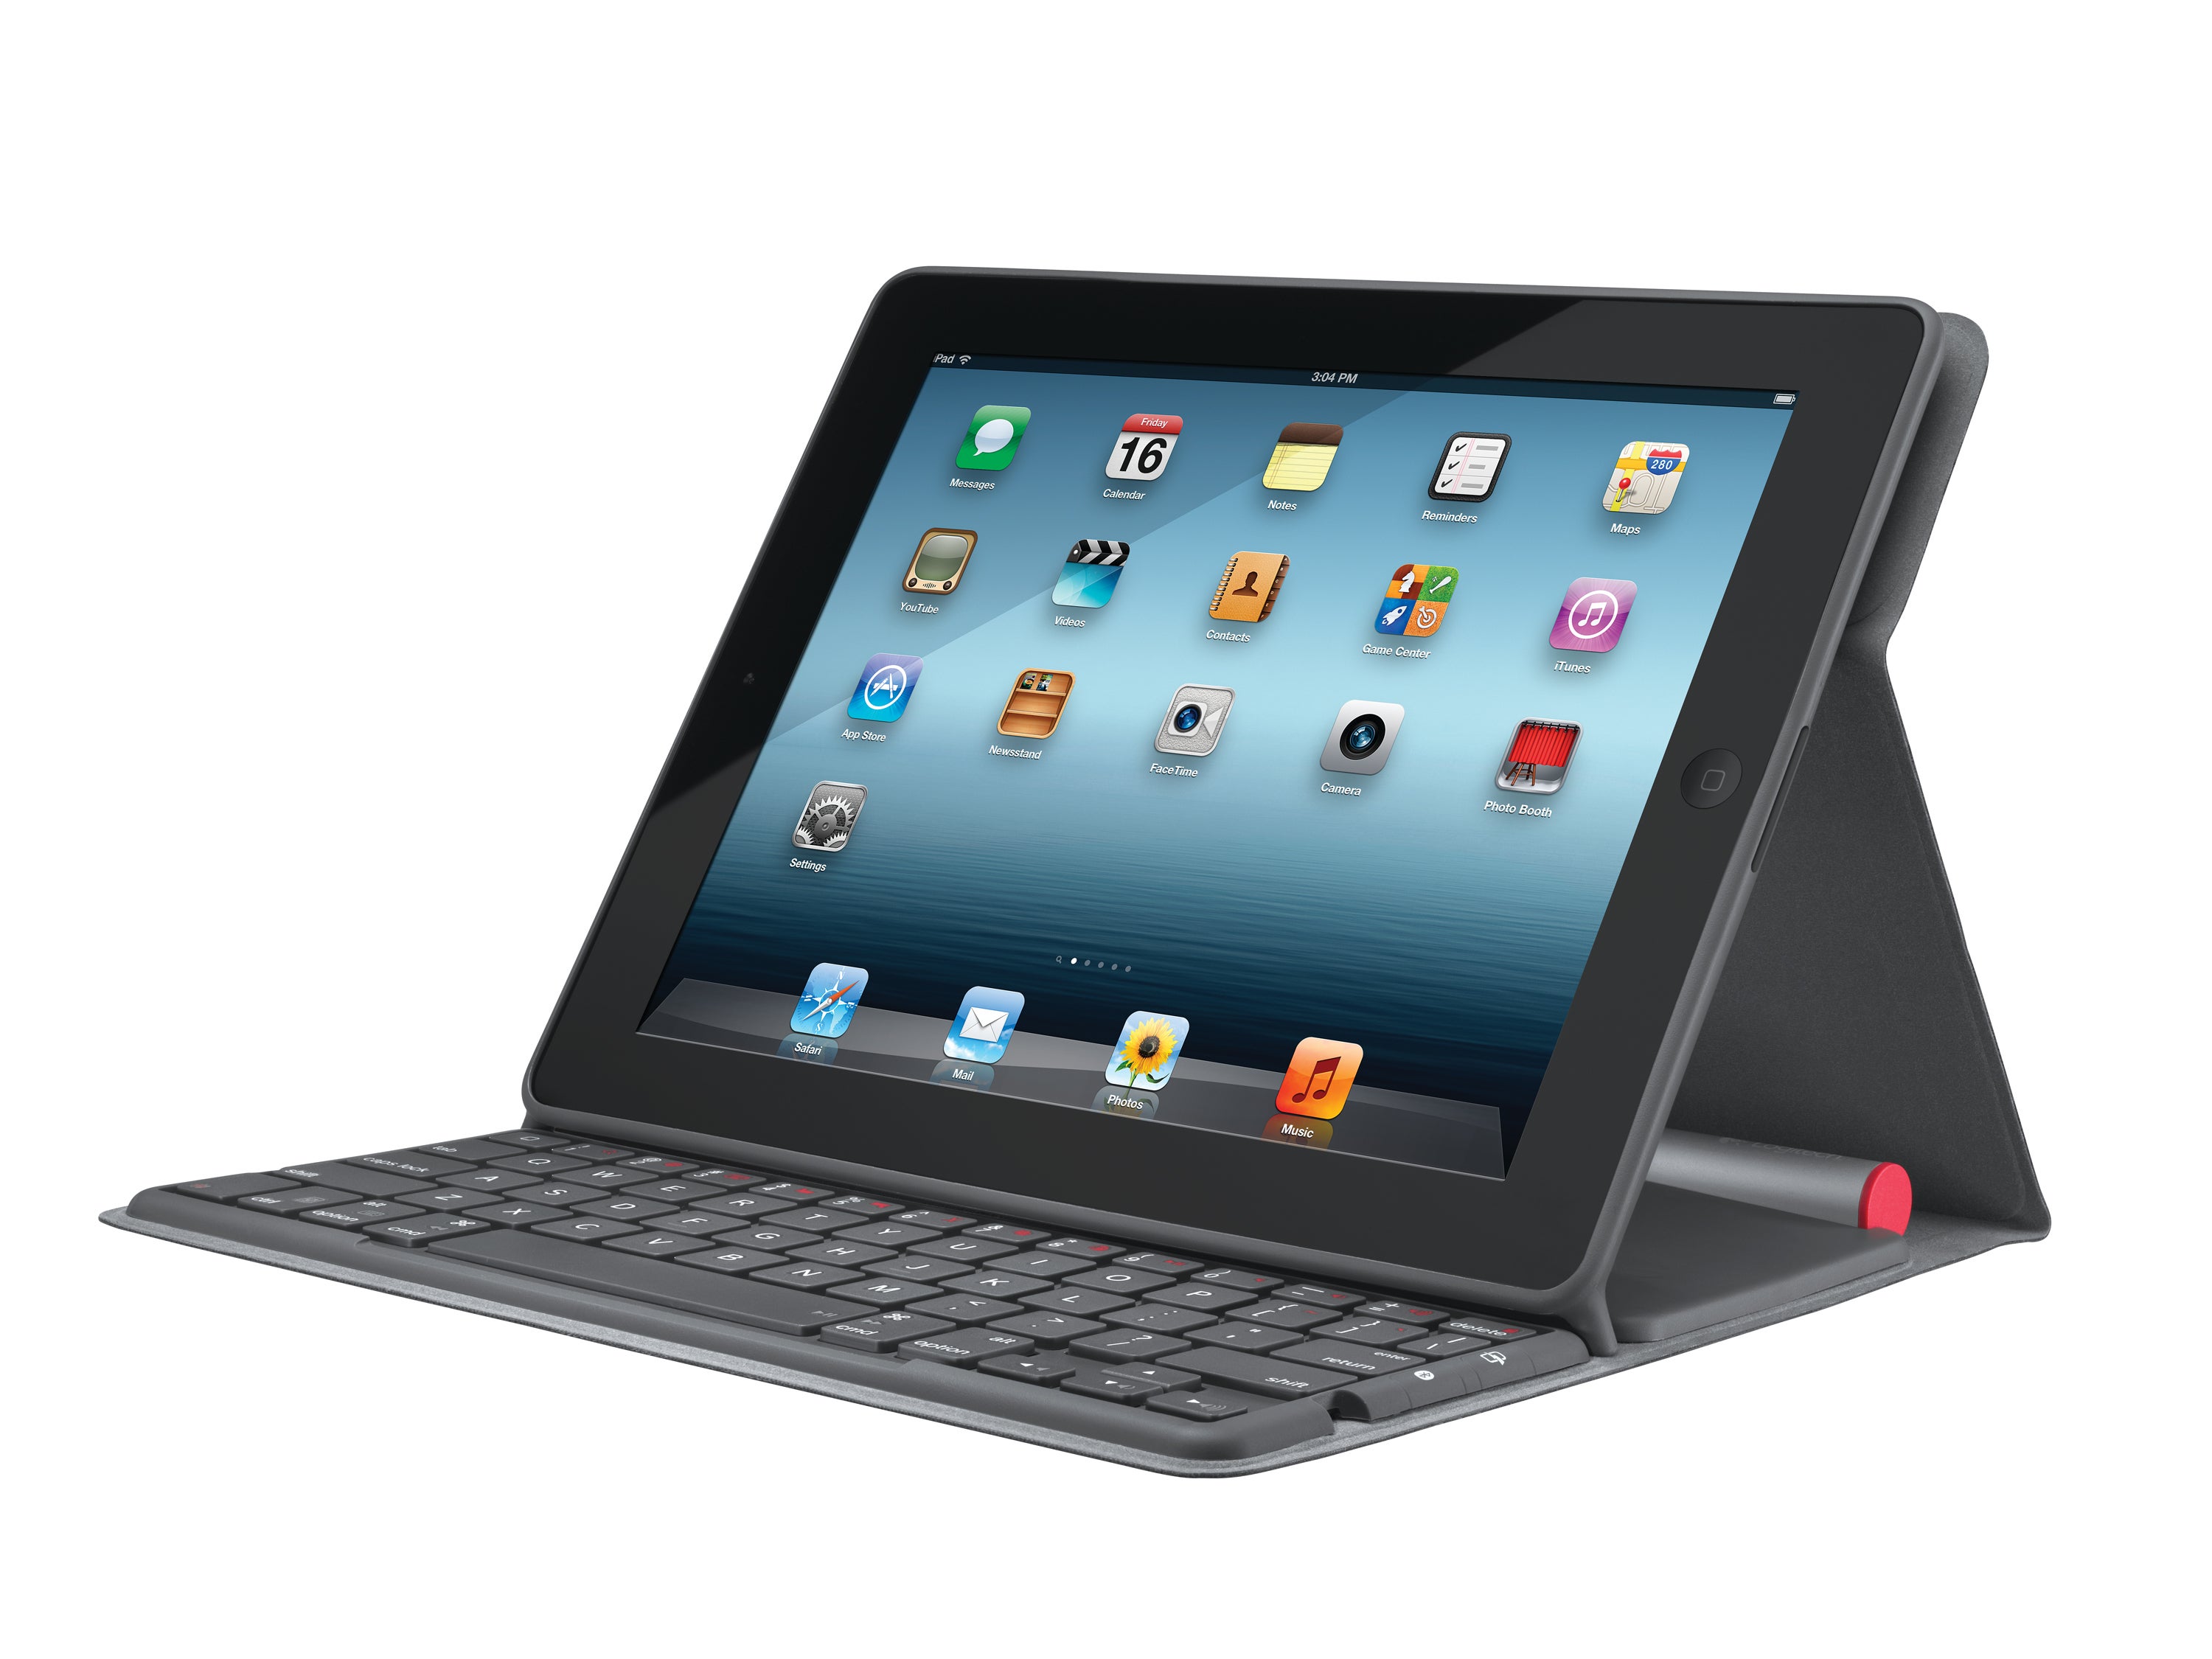 Logitech Solar Keyboard Folio for the new iPad can last two years on a full charge